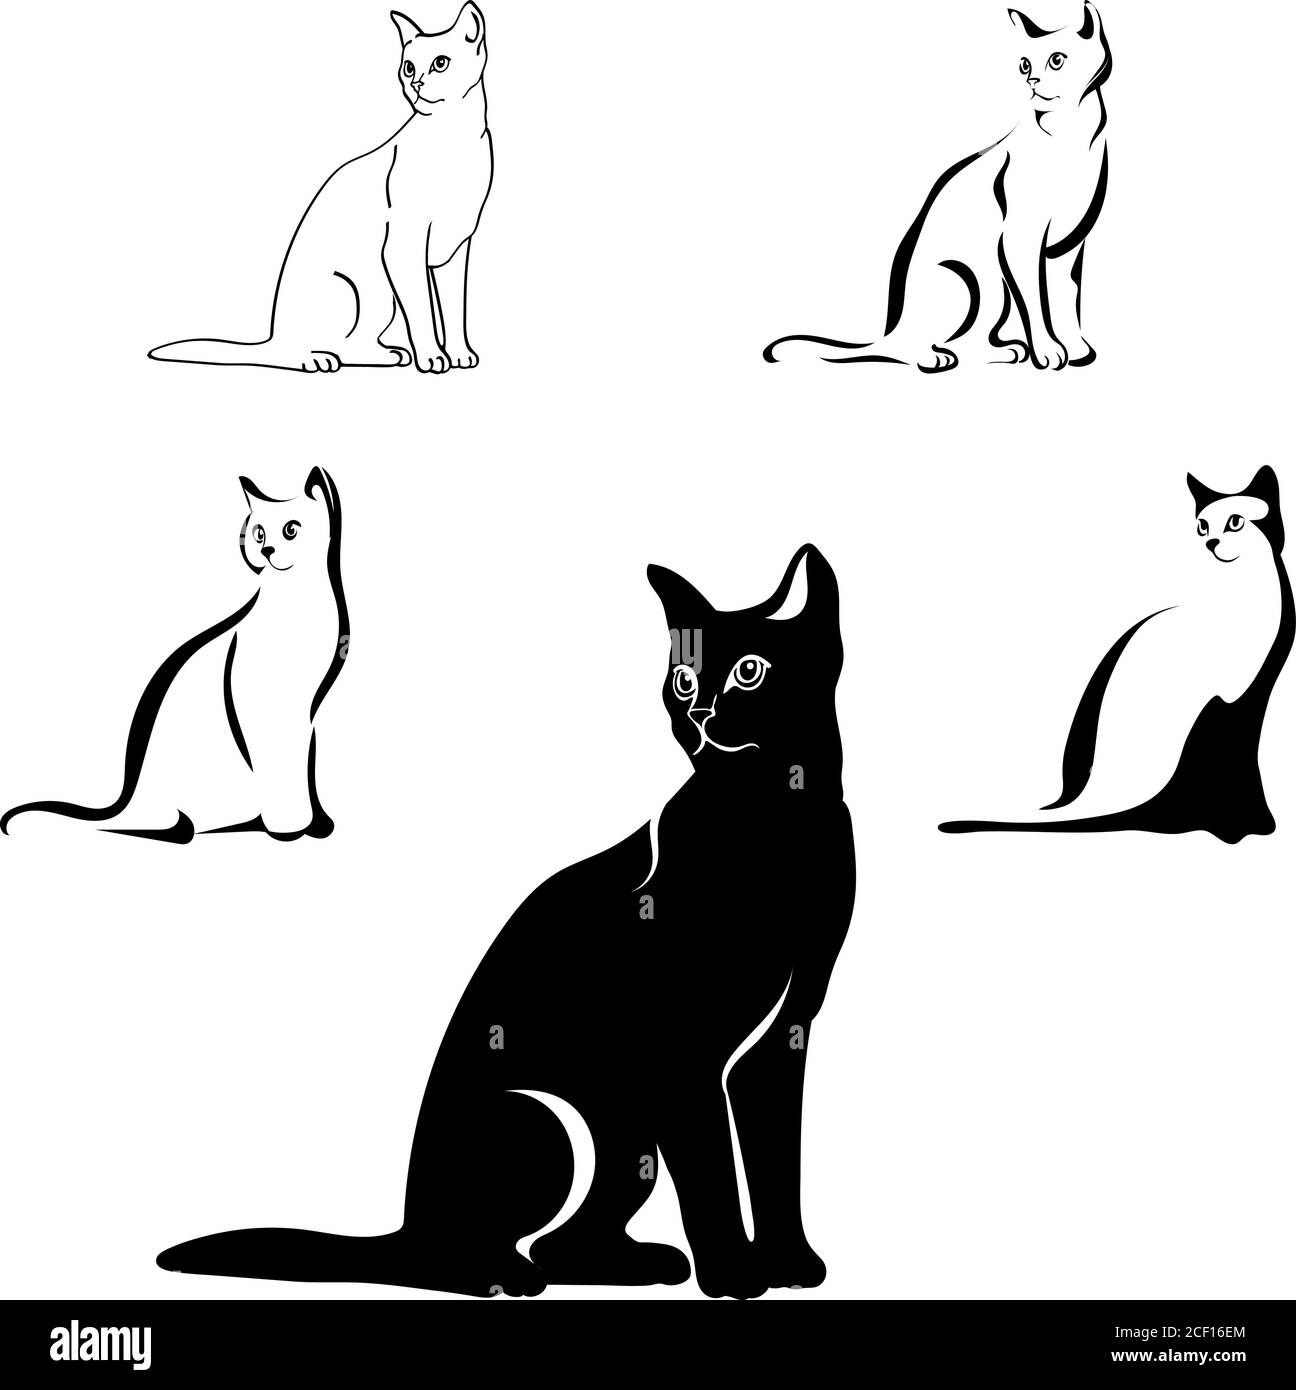 cats black image in various positions, cat sitting, lying down, walking, playing, vector, black, isolated, white, set, background, outline, animal Stock Vector